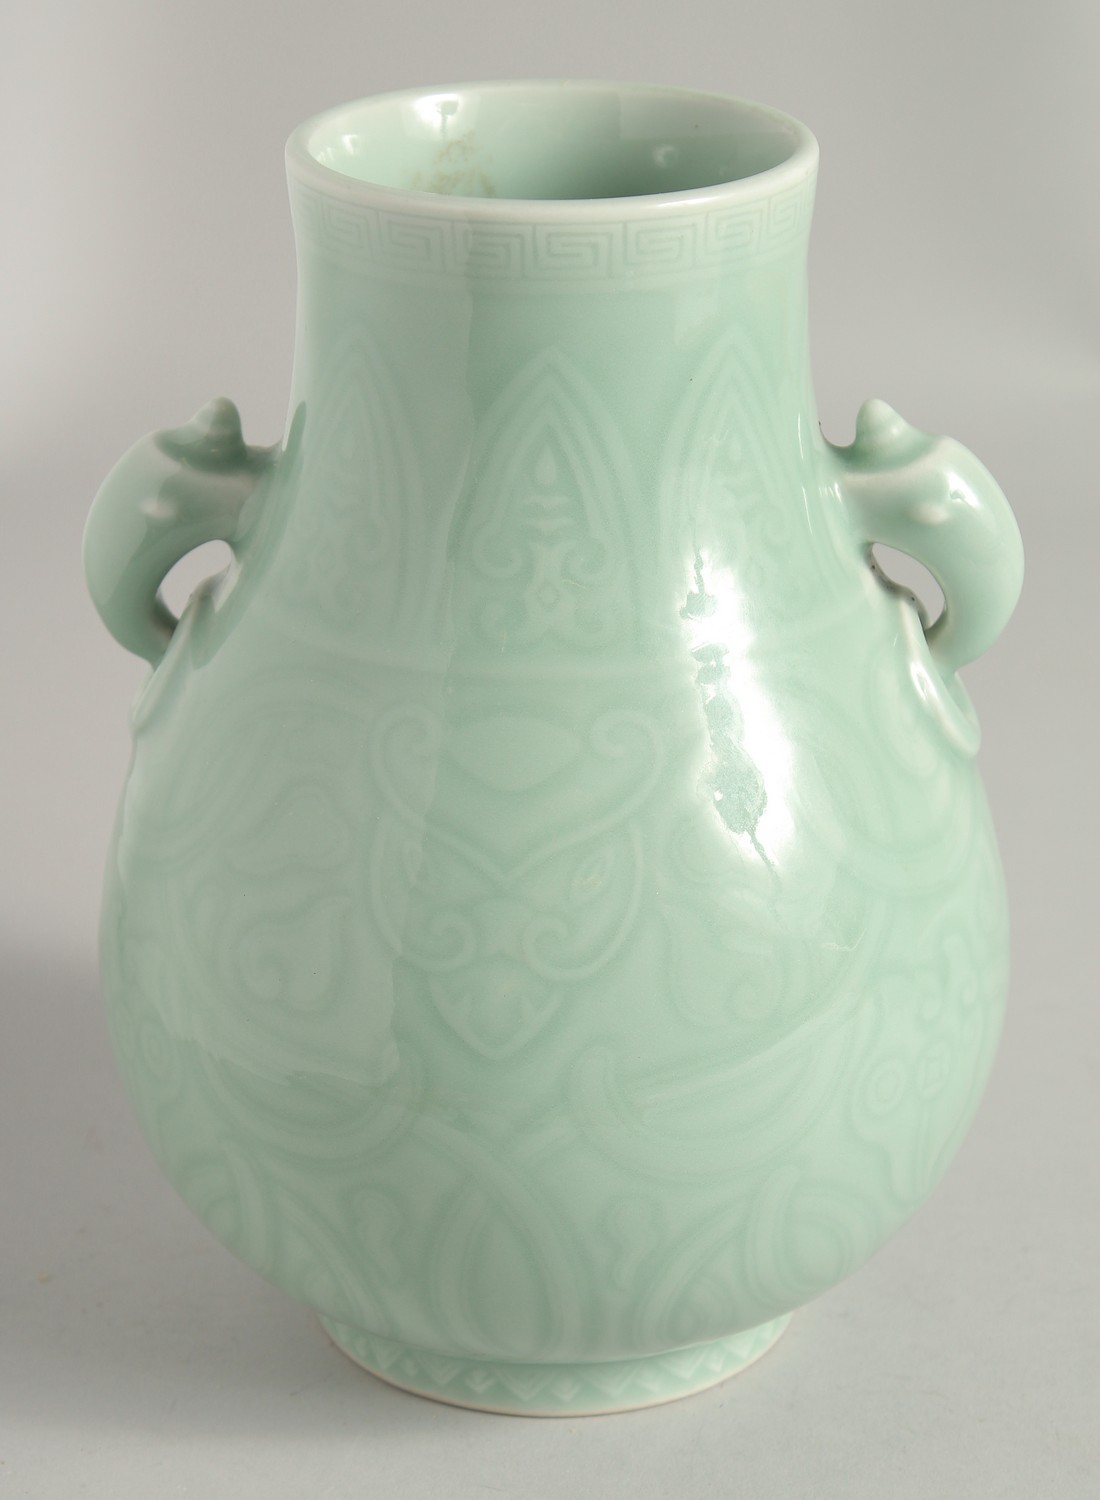 A CHINESE CLAIRE-DE-LUNE CELADON GLAZE TWIN HANDLE VASE, of archaic form with moulded handles and